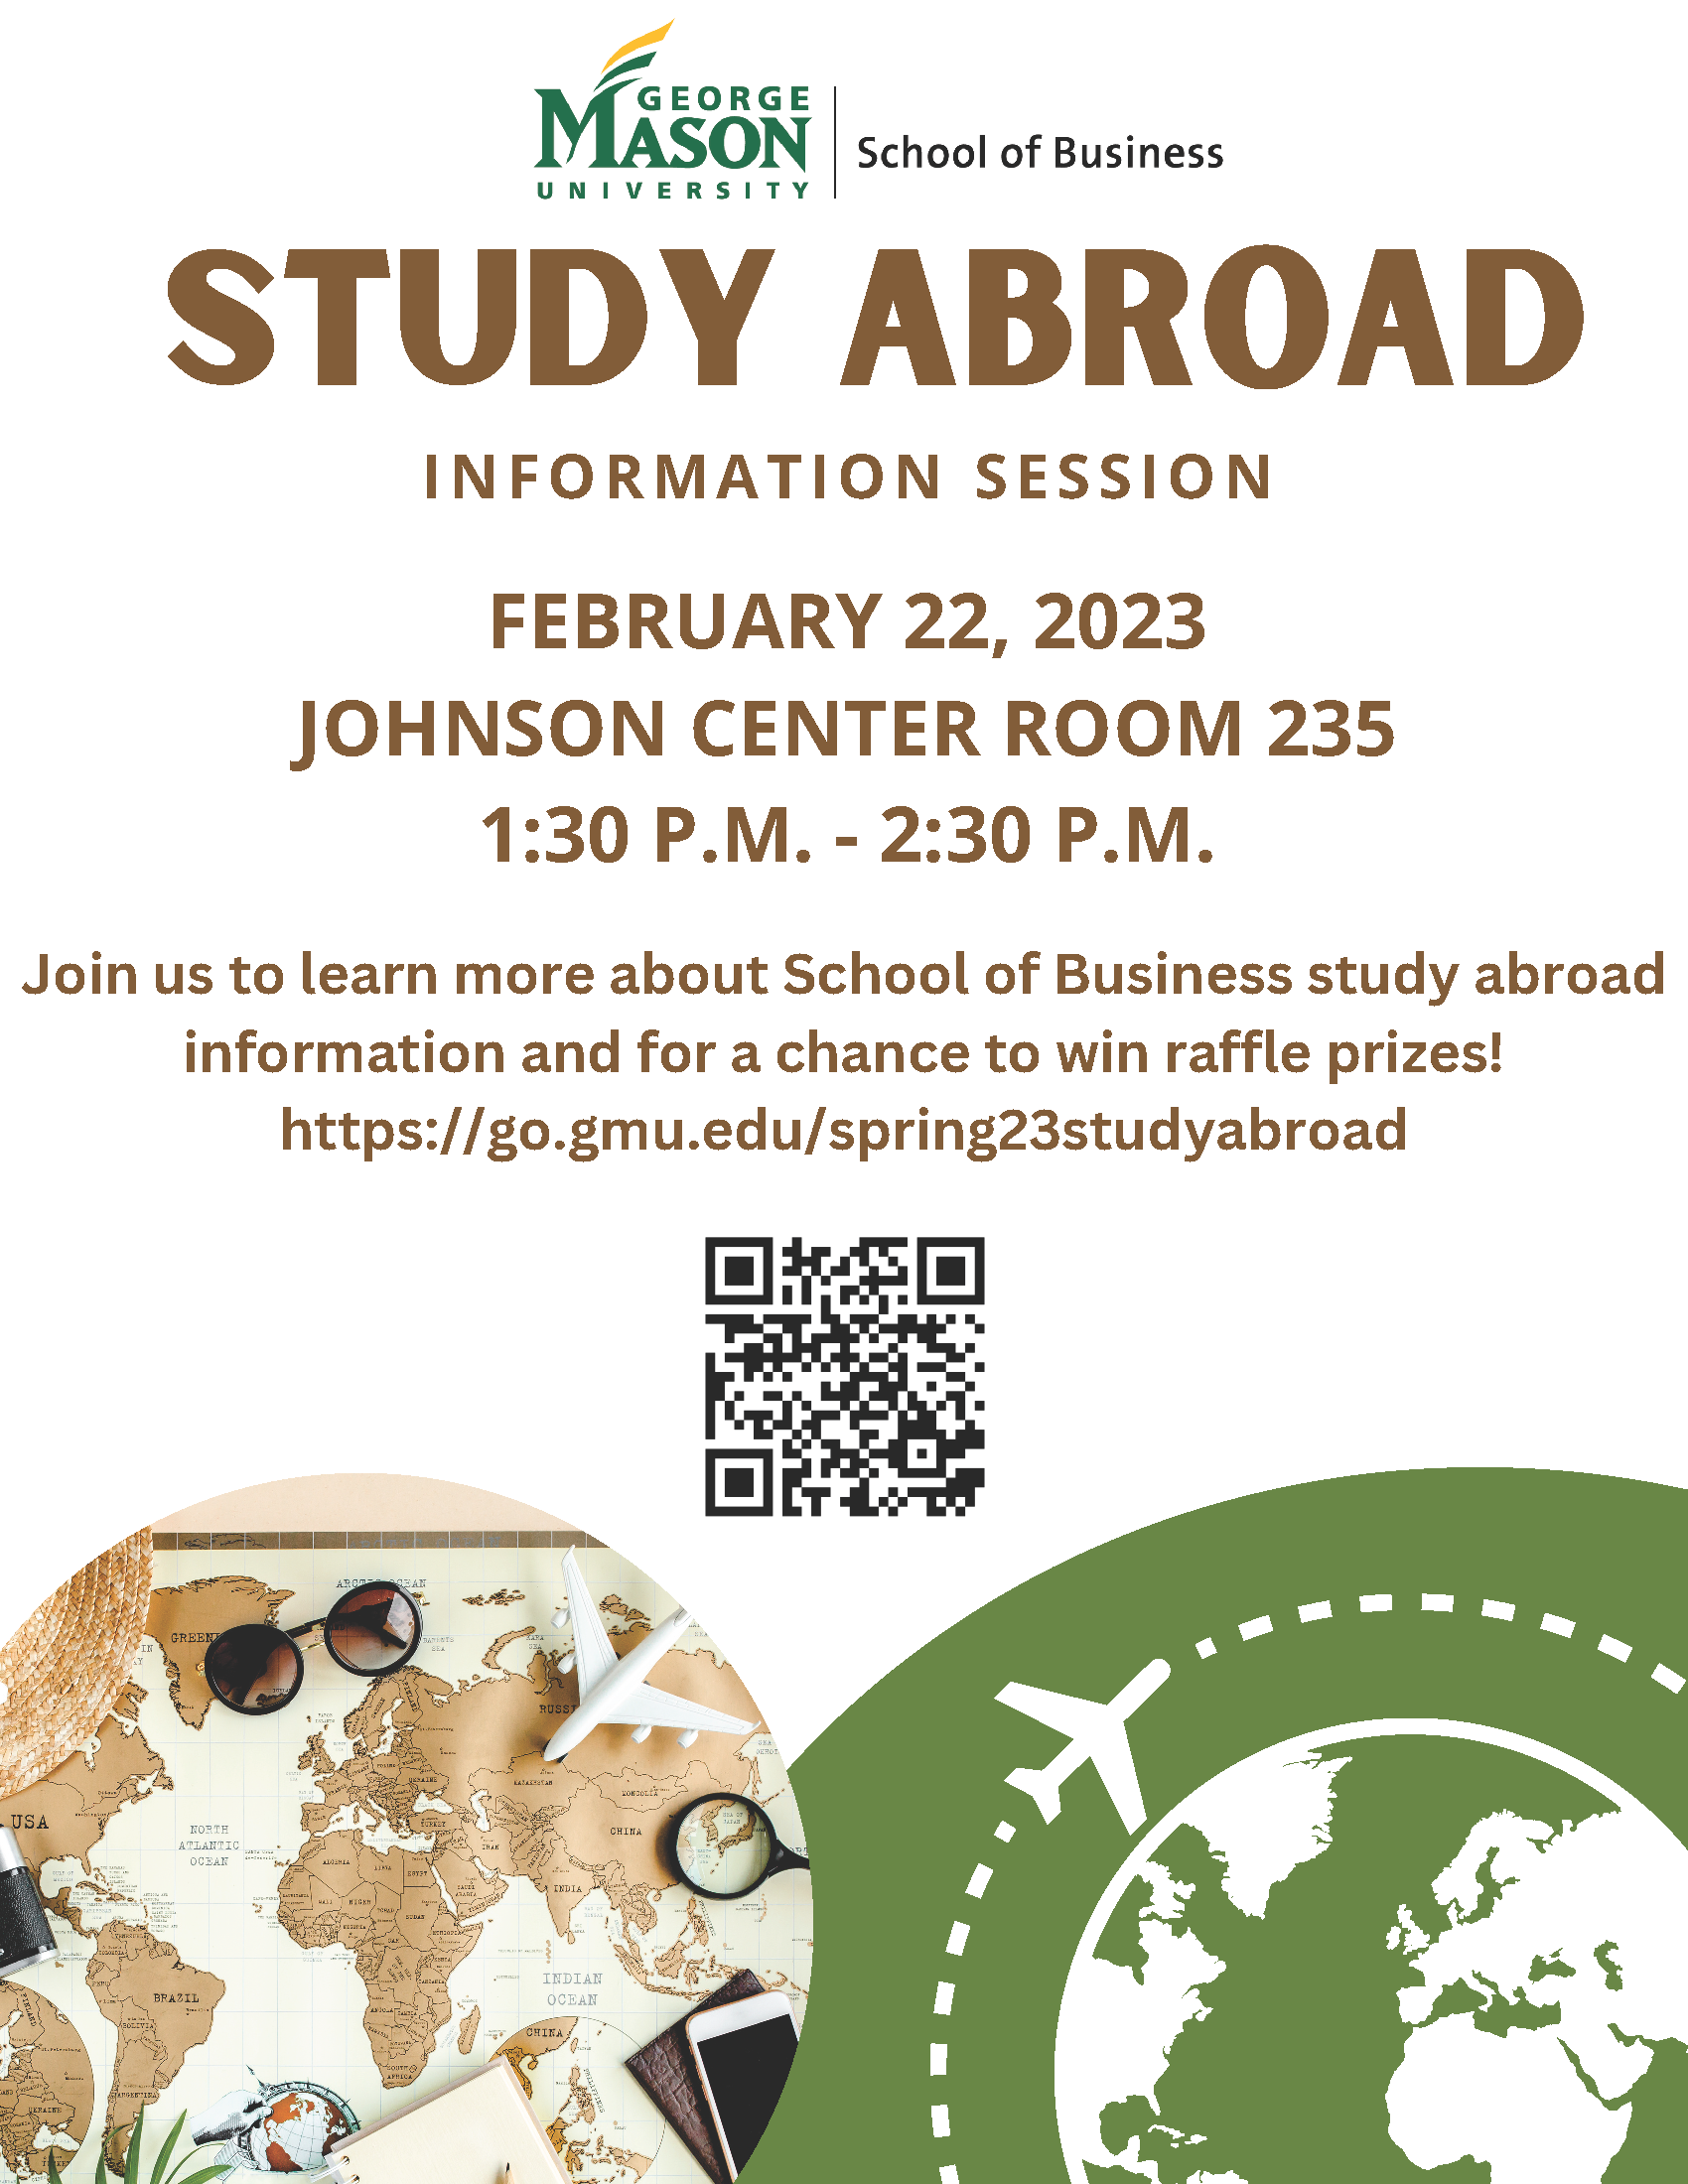 A flyer for the event is attached. Please use the QR code or visit https://go.gmu.edu/spring23studyabroad to RSVP 